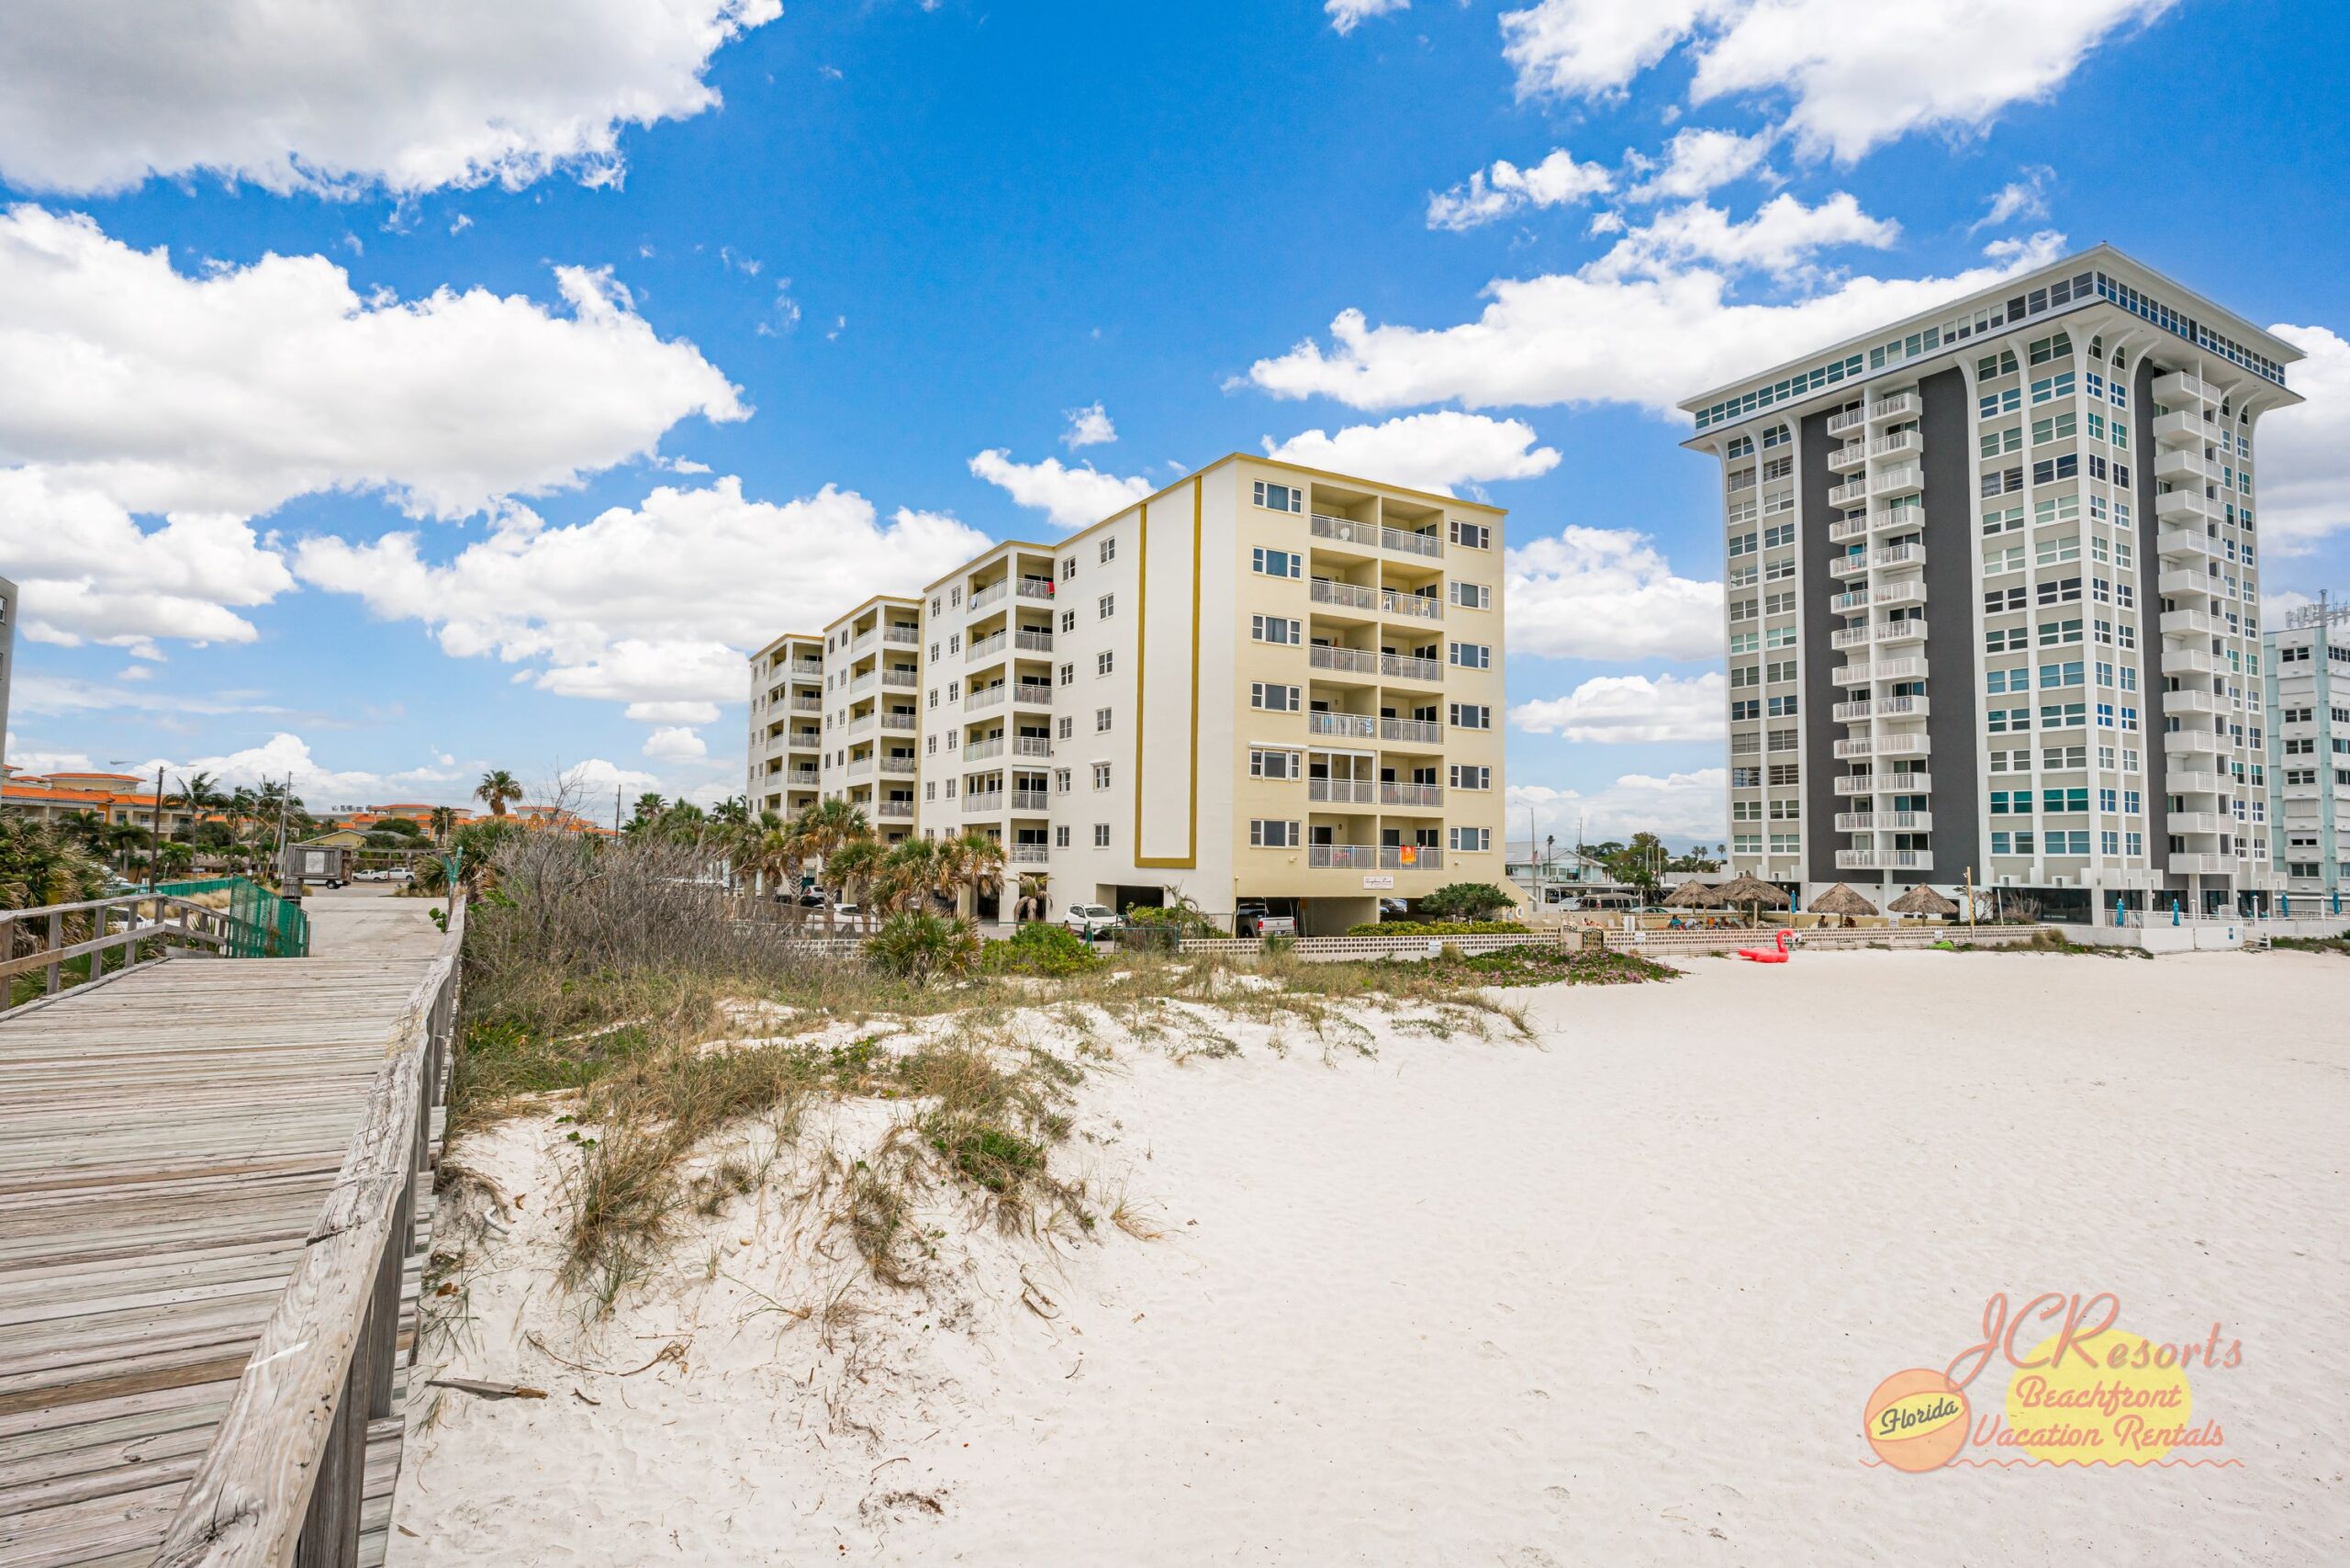 JC Resorts Anglers Cove Exteriors Redington Shores-from pier smaller